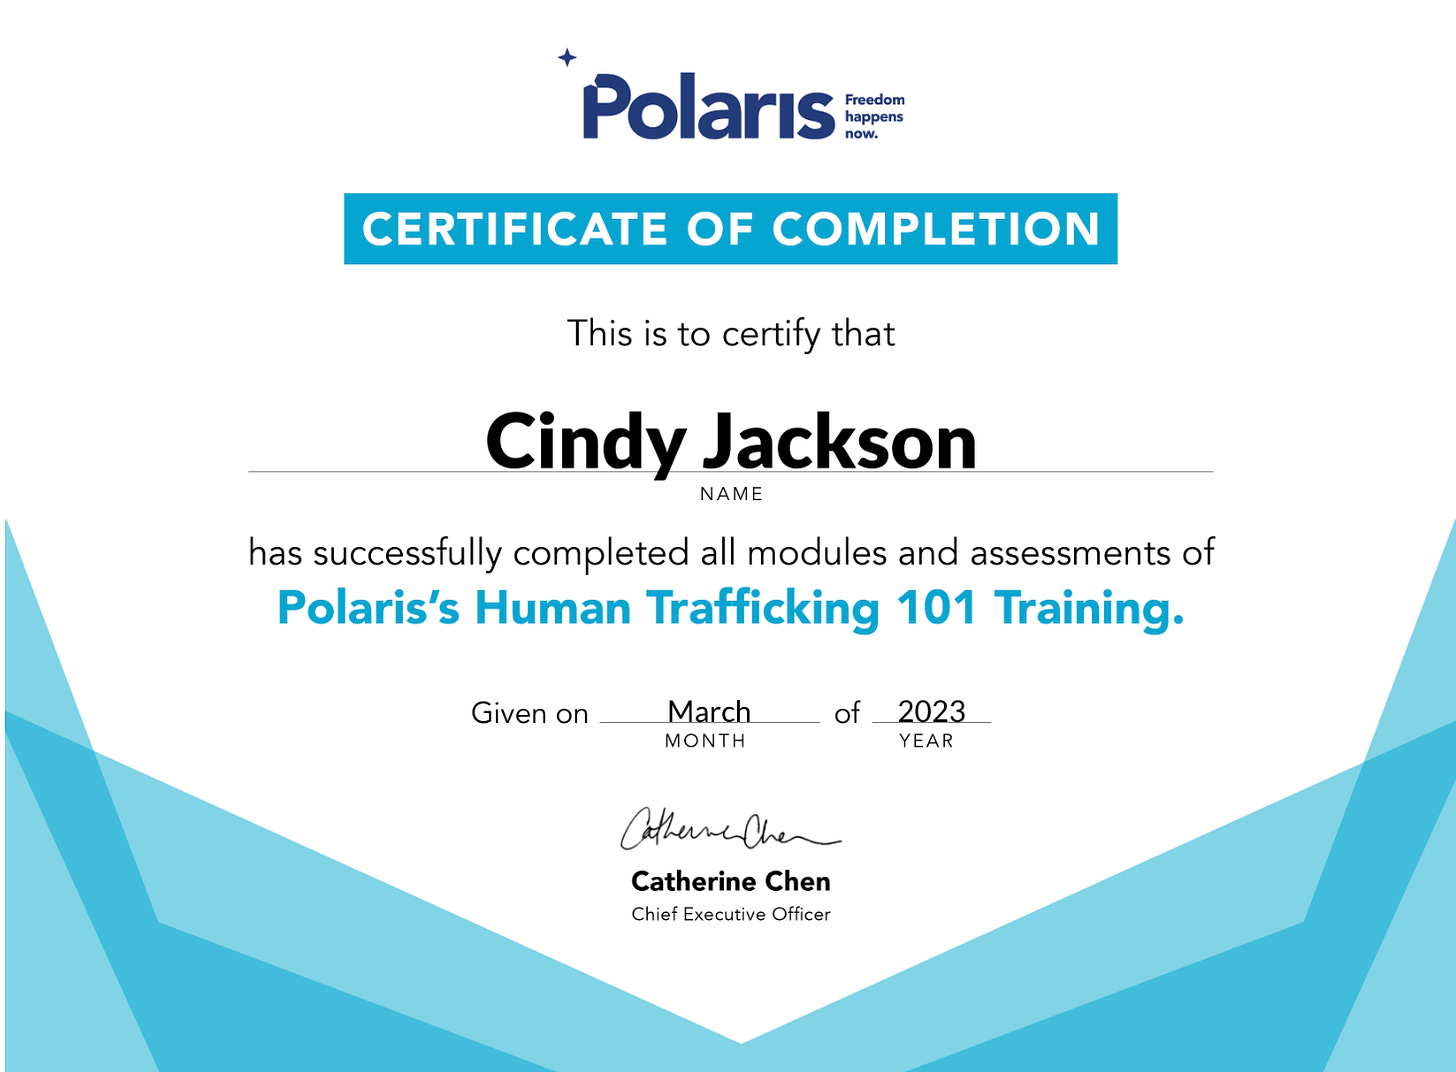 Certificate of completion for Polaris's Human Trafficking 101 Training